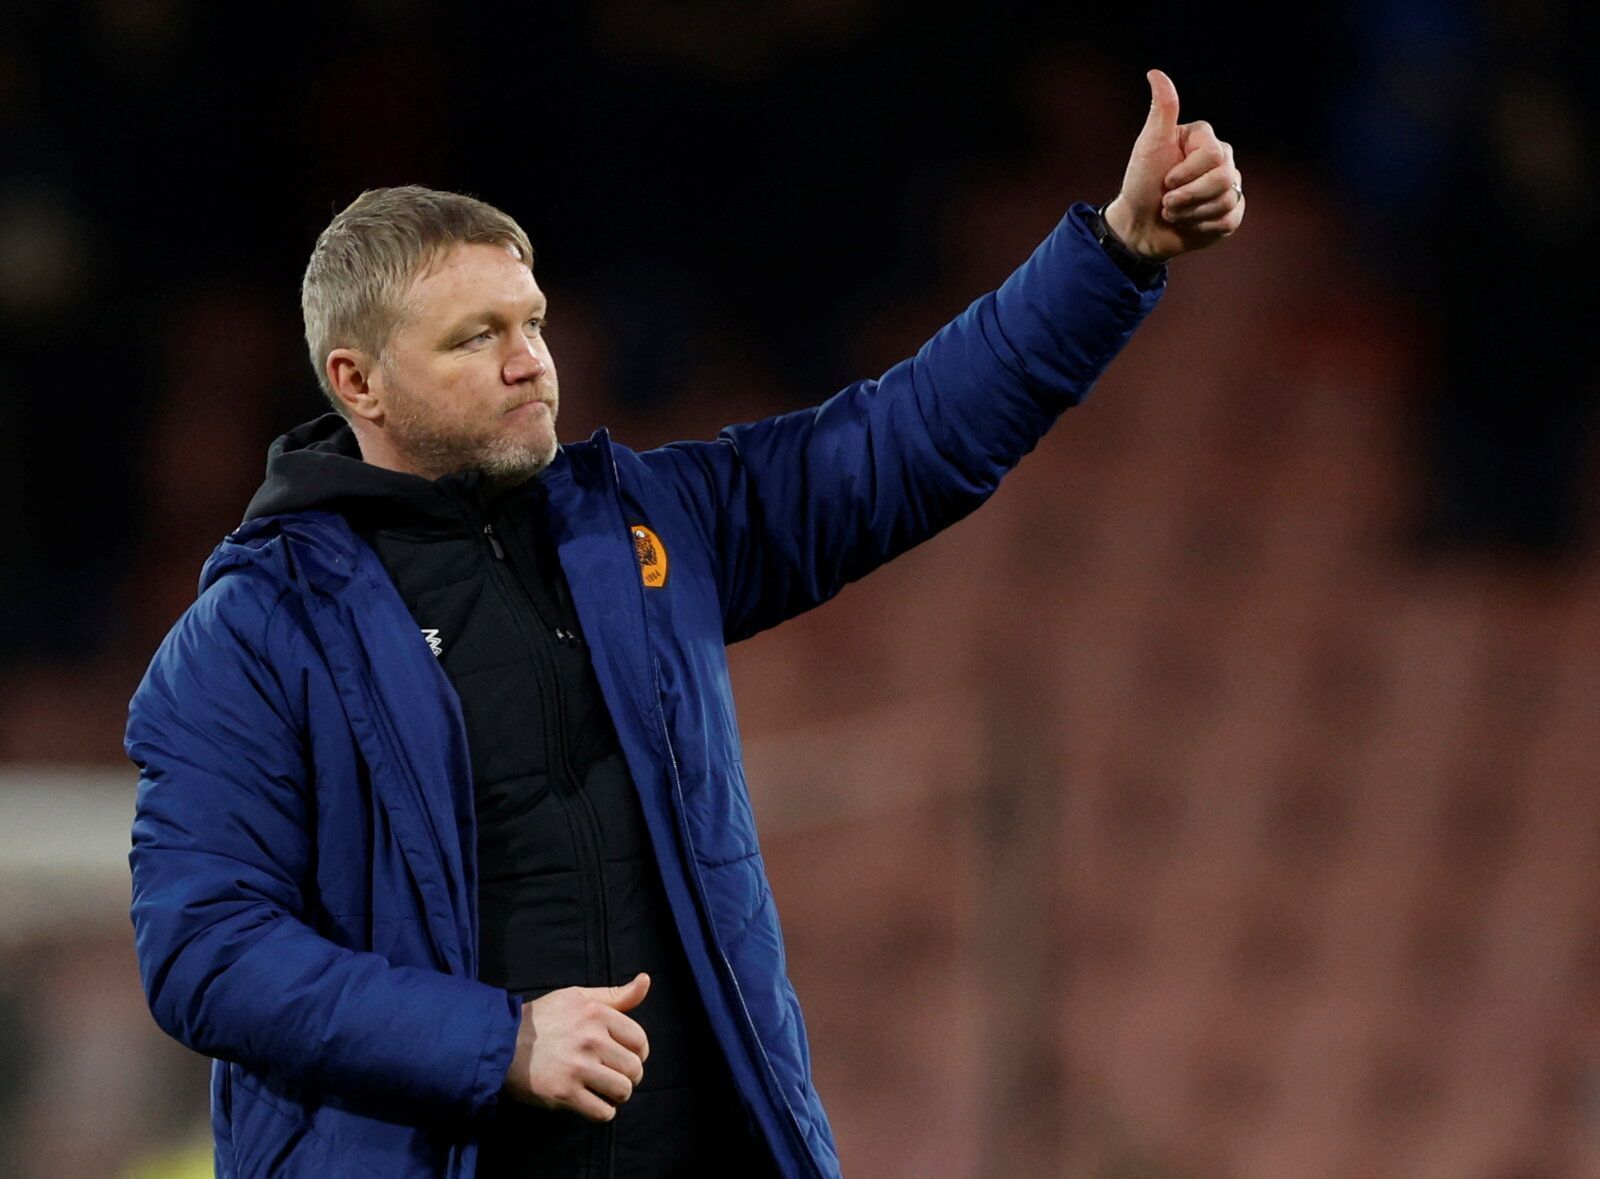 Soccer Football - Championship - AFC Bournemouth v Hull City - Vitality Stadium, Bournemouth, Britain - January 22, 2022 Hull City manager Grant McCann acknowledges fans after the match    Action Images/John Sibley  EDITORIAL USE ONLY. No use with unauthorized audio, video, data, fixture lists, club/league logos or 